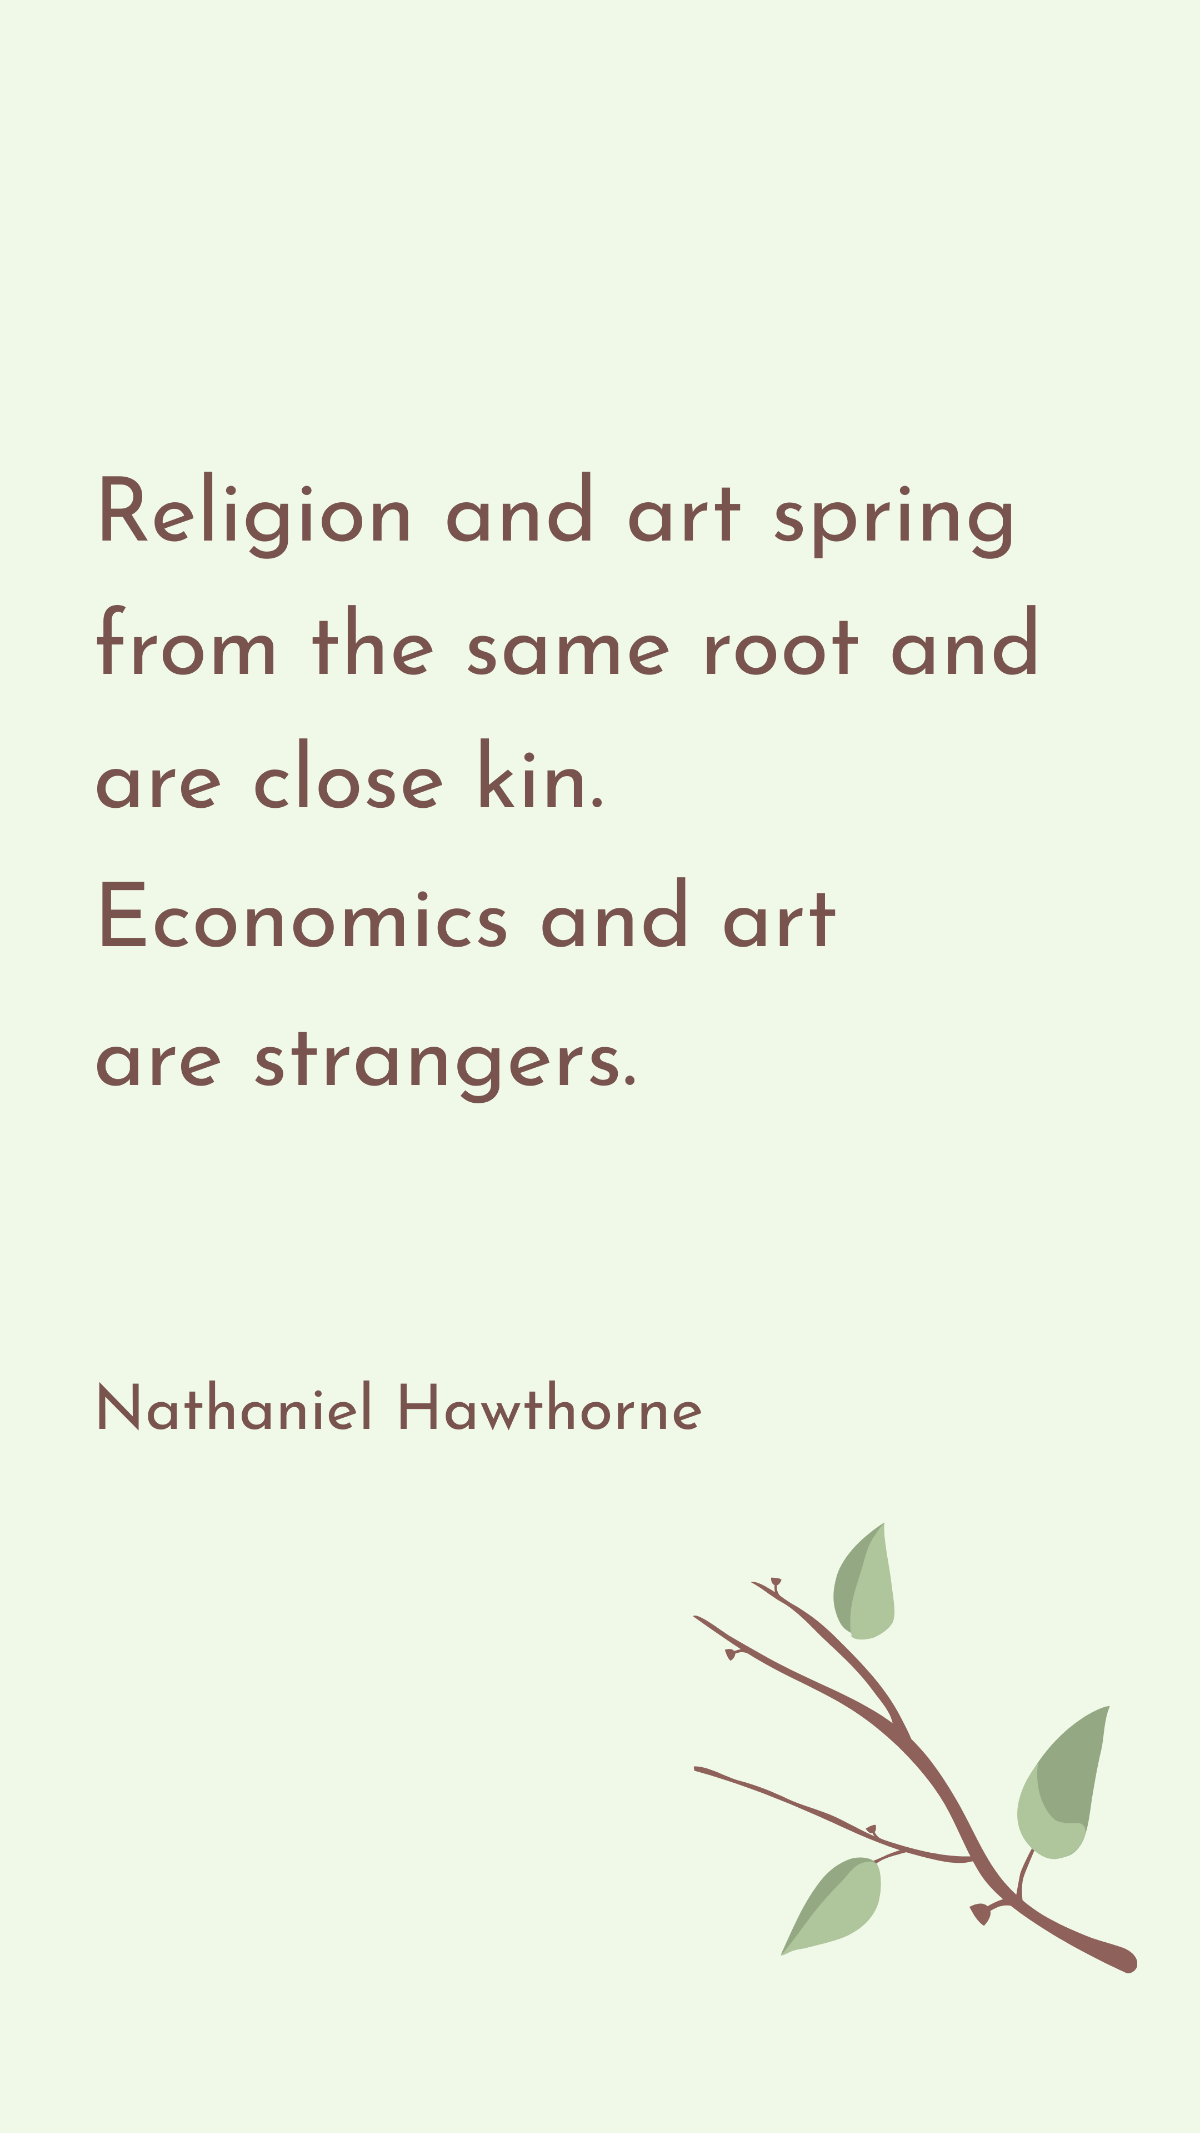 Nathaniel Hawthorne - Religion and art spring from the same root and are close kin. Economics and art are strangers.